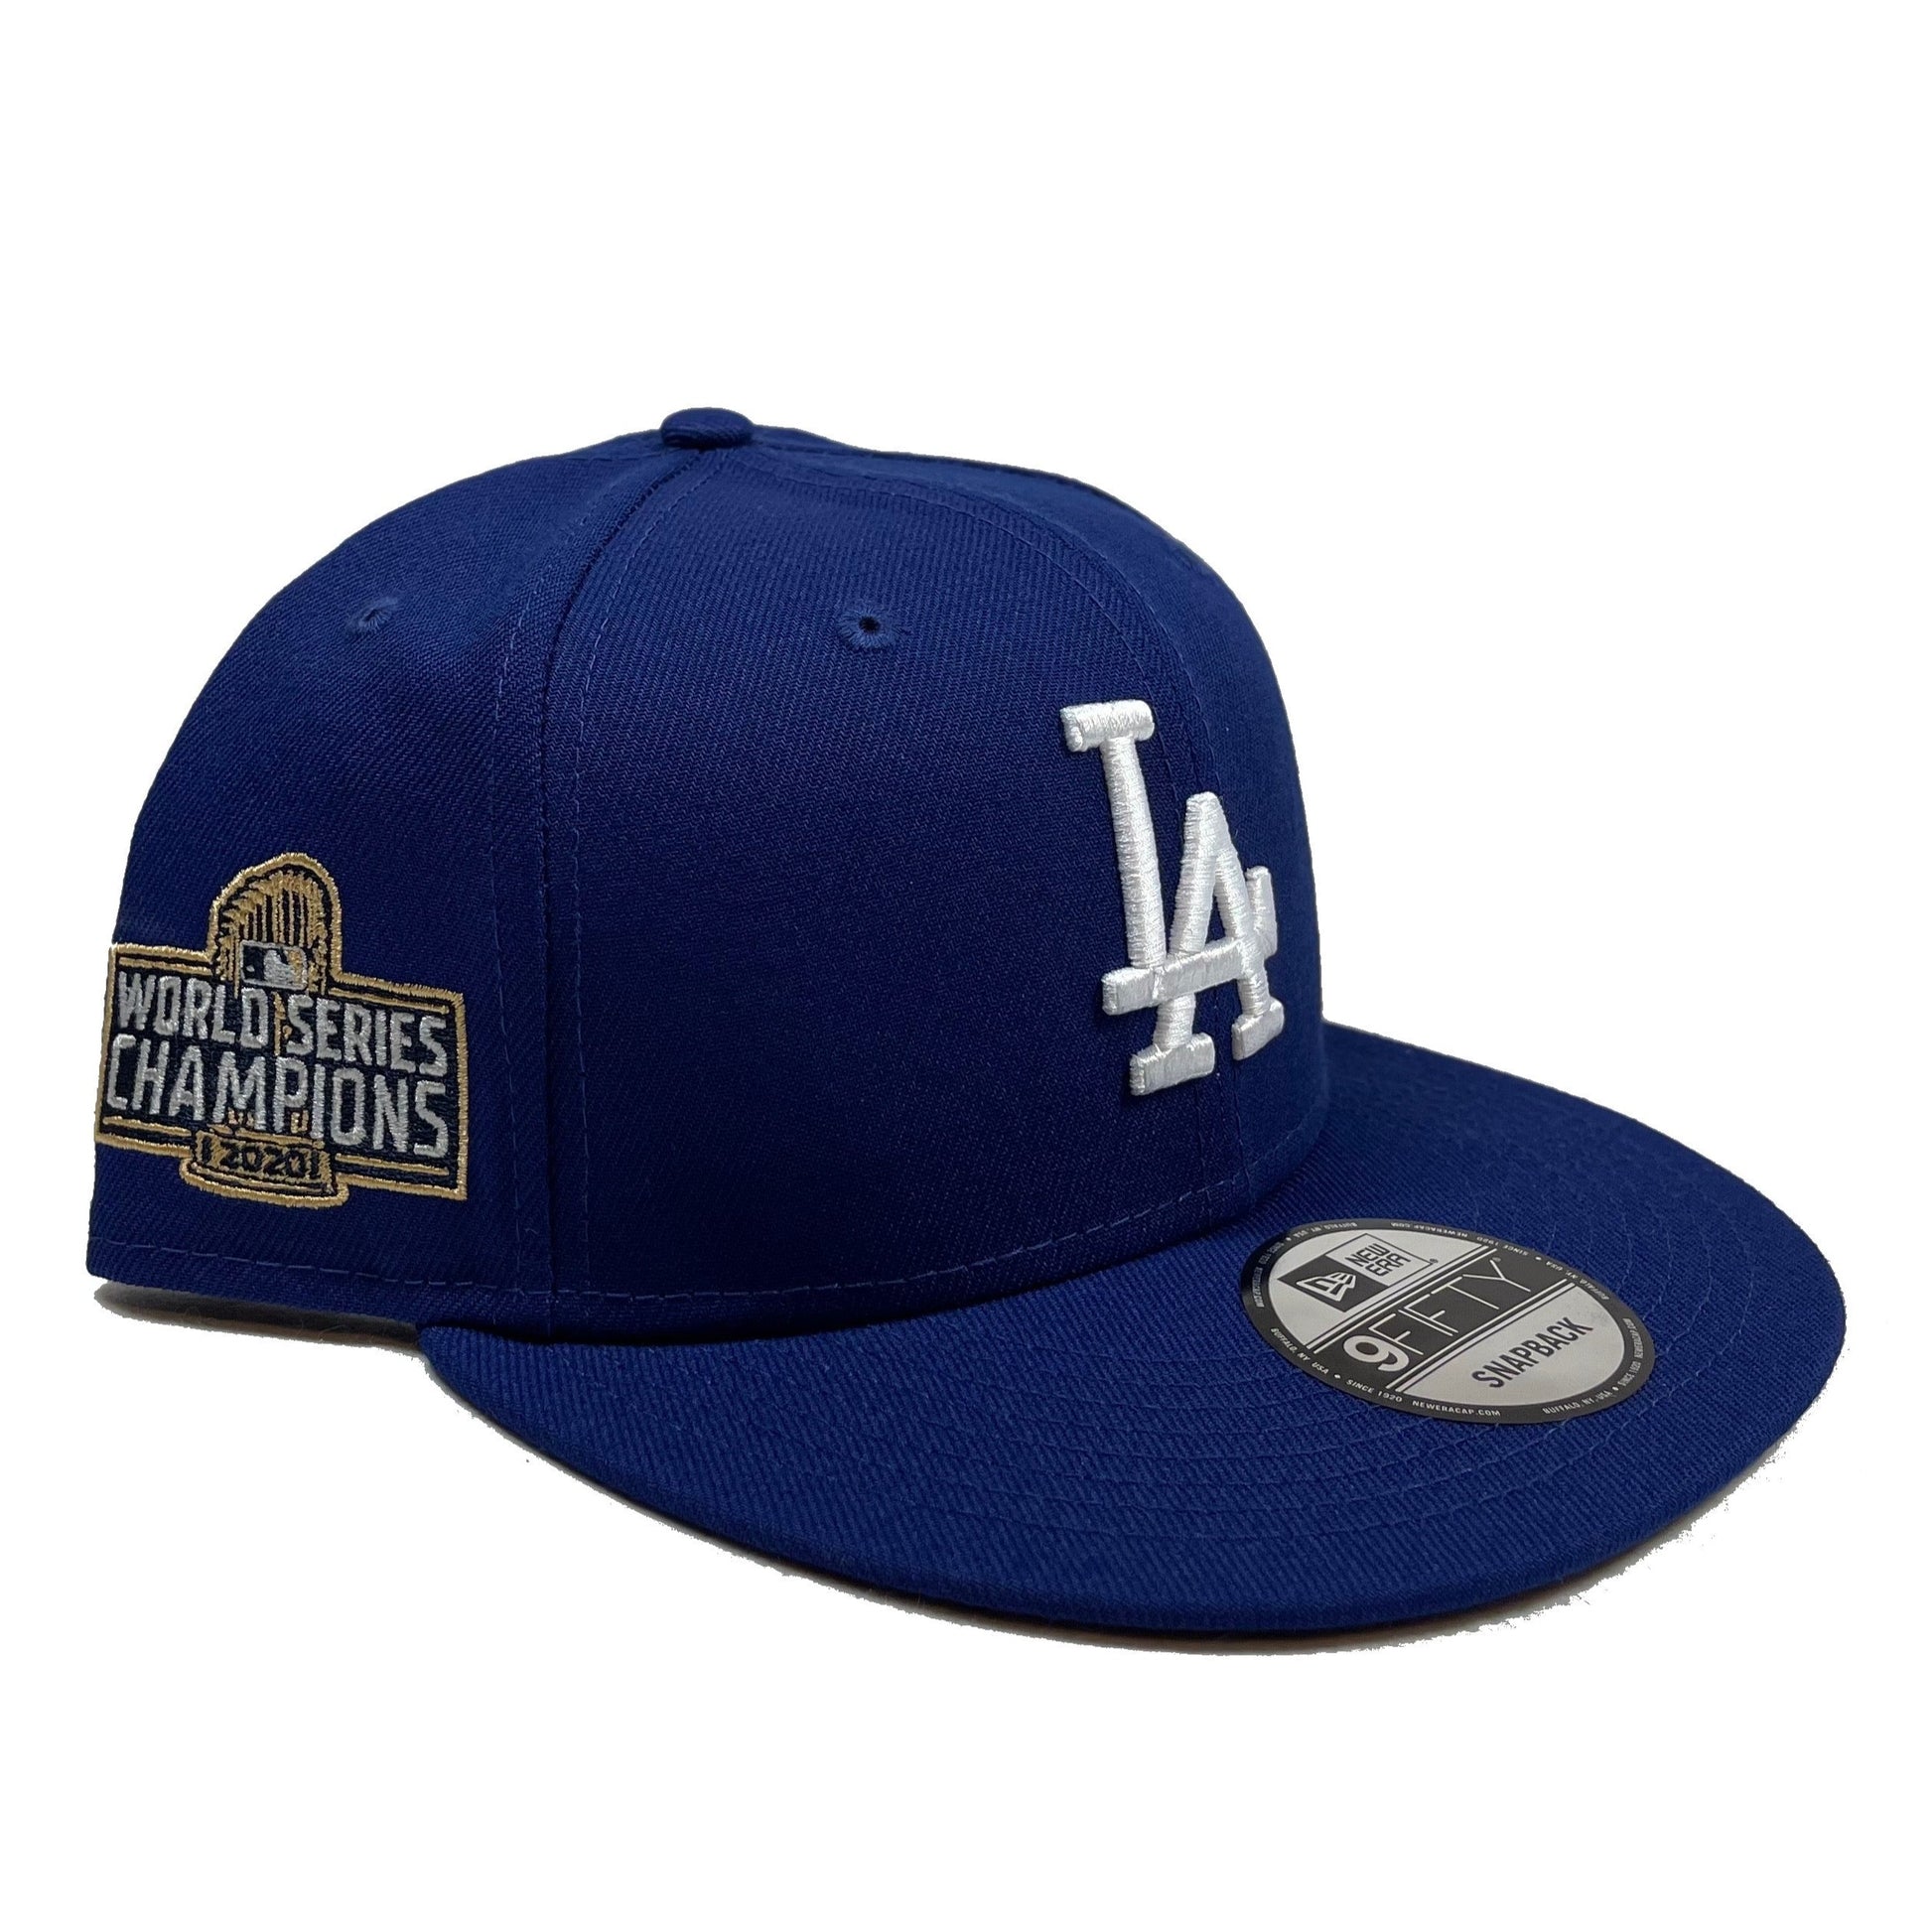 Where to get Los Angeles Dodgers 2020 World Series championship shirts,  hats and MLB gear 